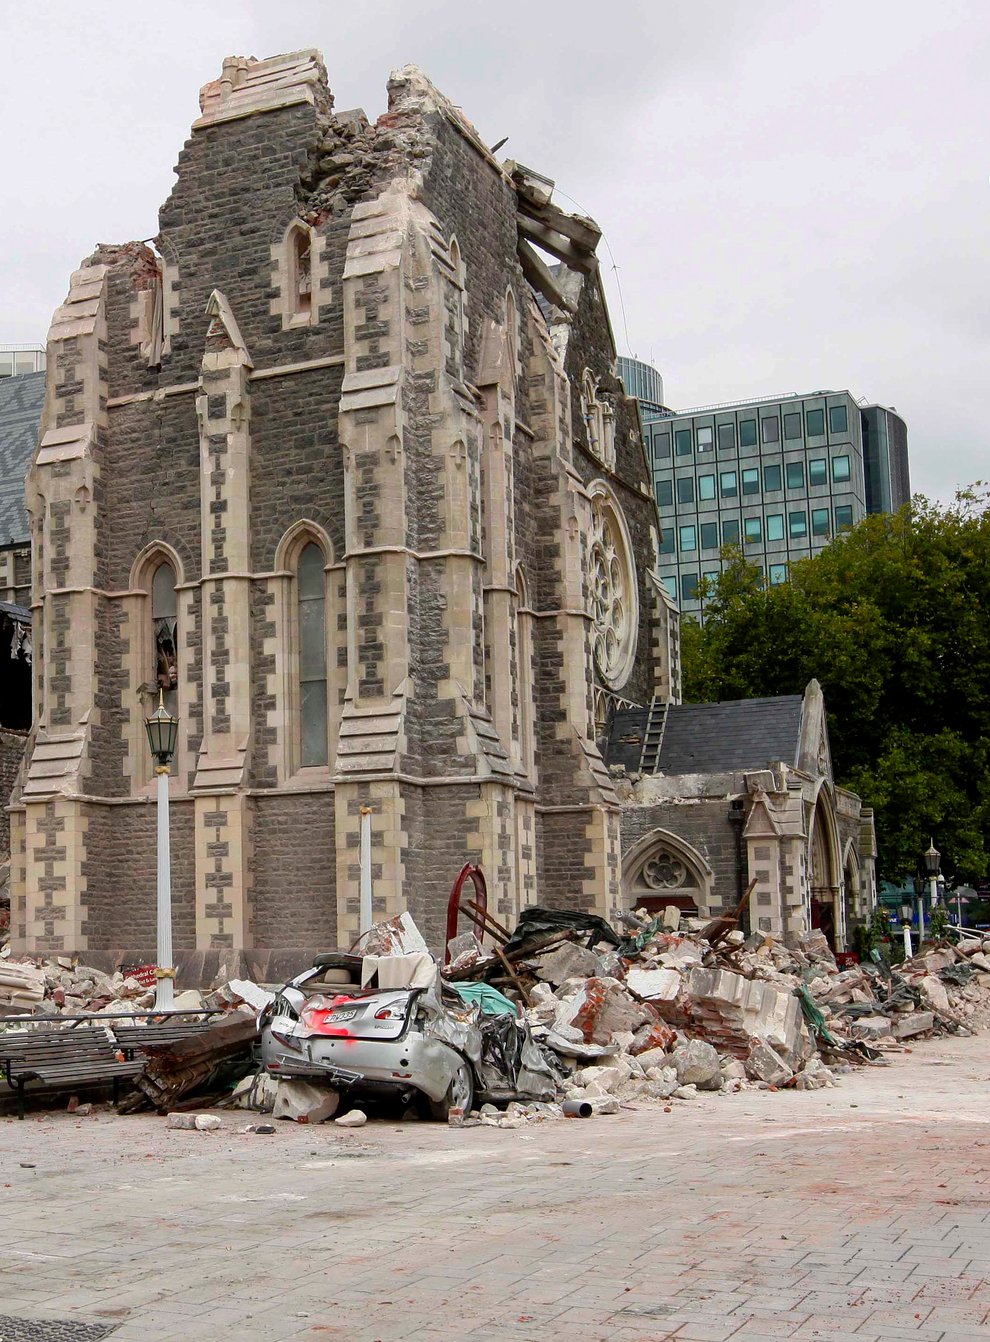 The ruined Christchurch cathedral after the 2011 earthquake